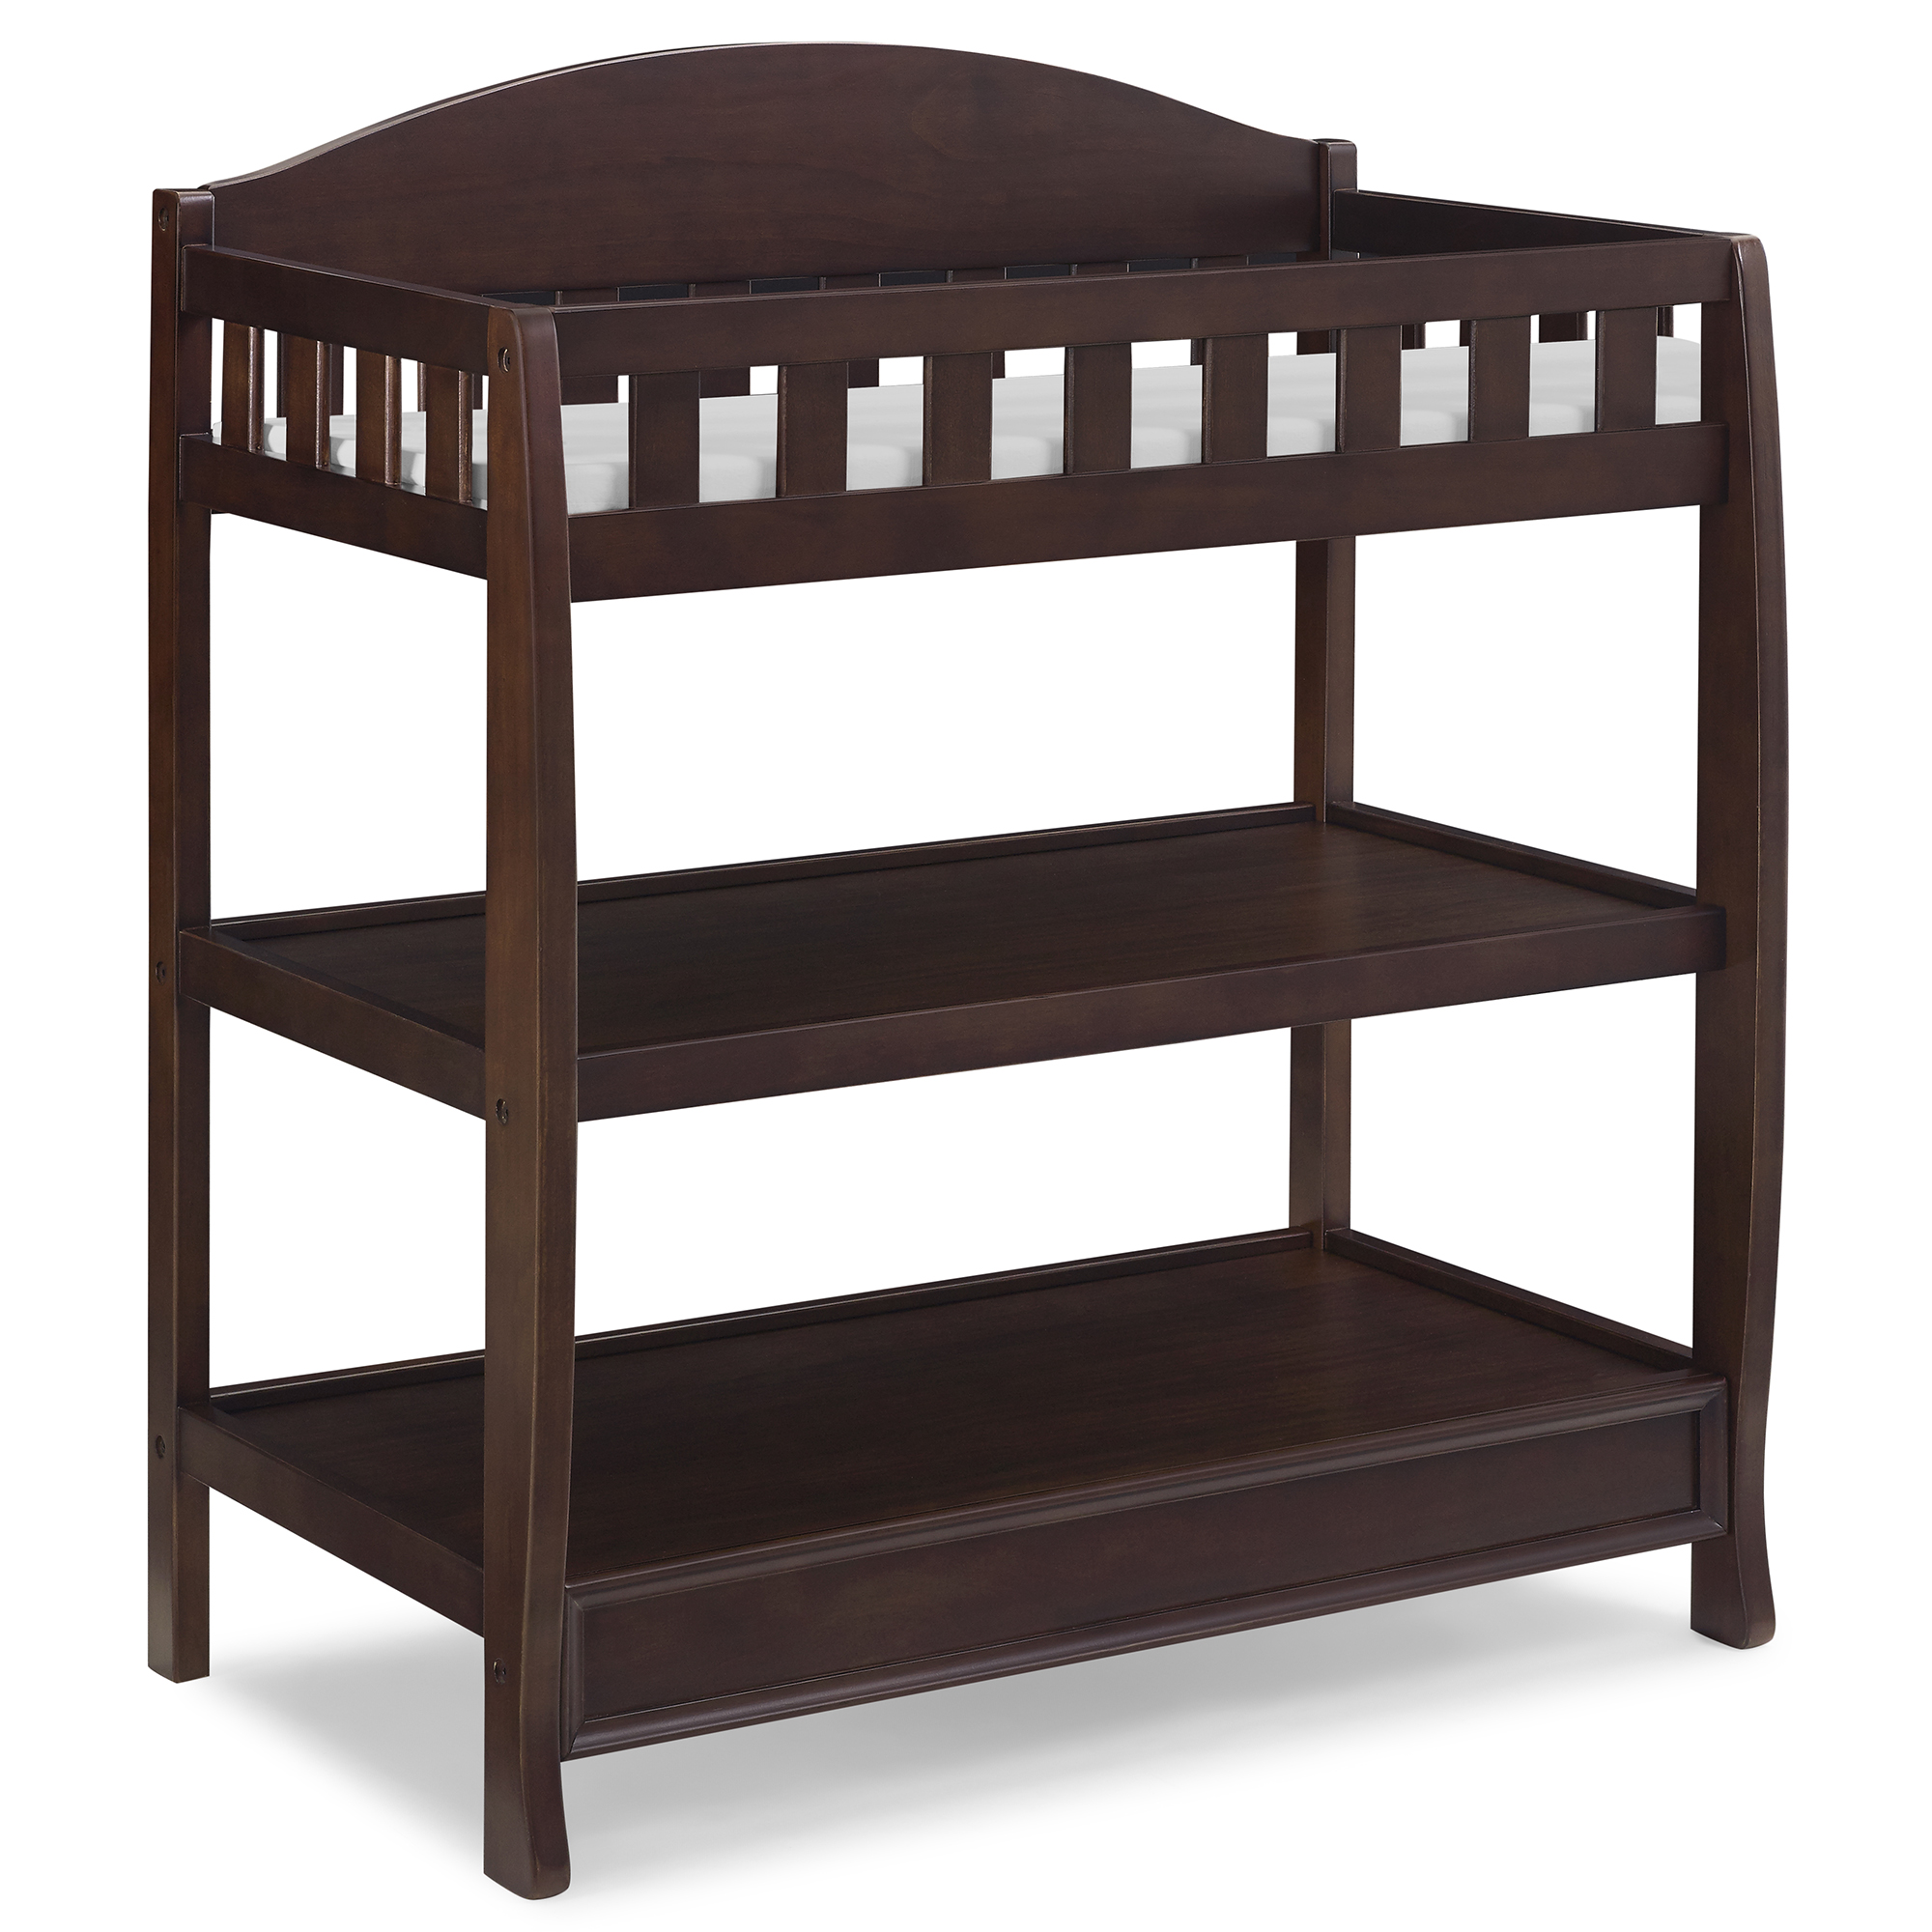 Delta Children Wilmington Changing Table with Pad, Walnut Espresso - image 1 of 5